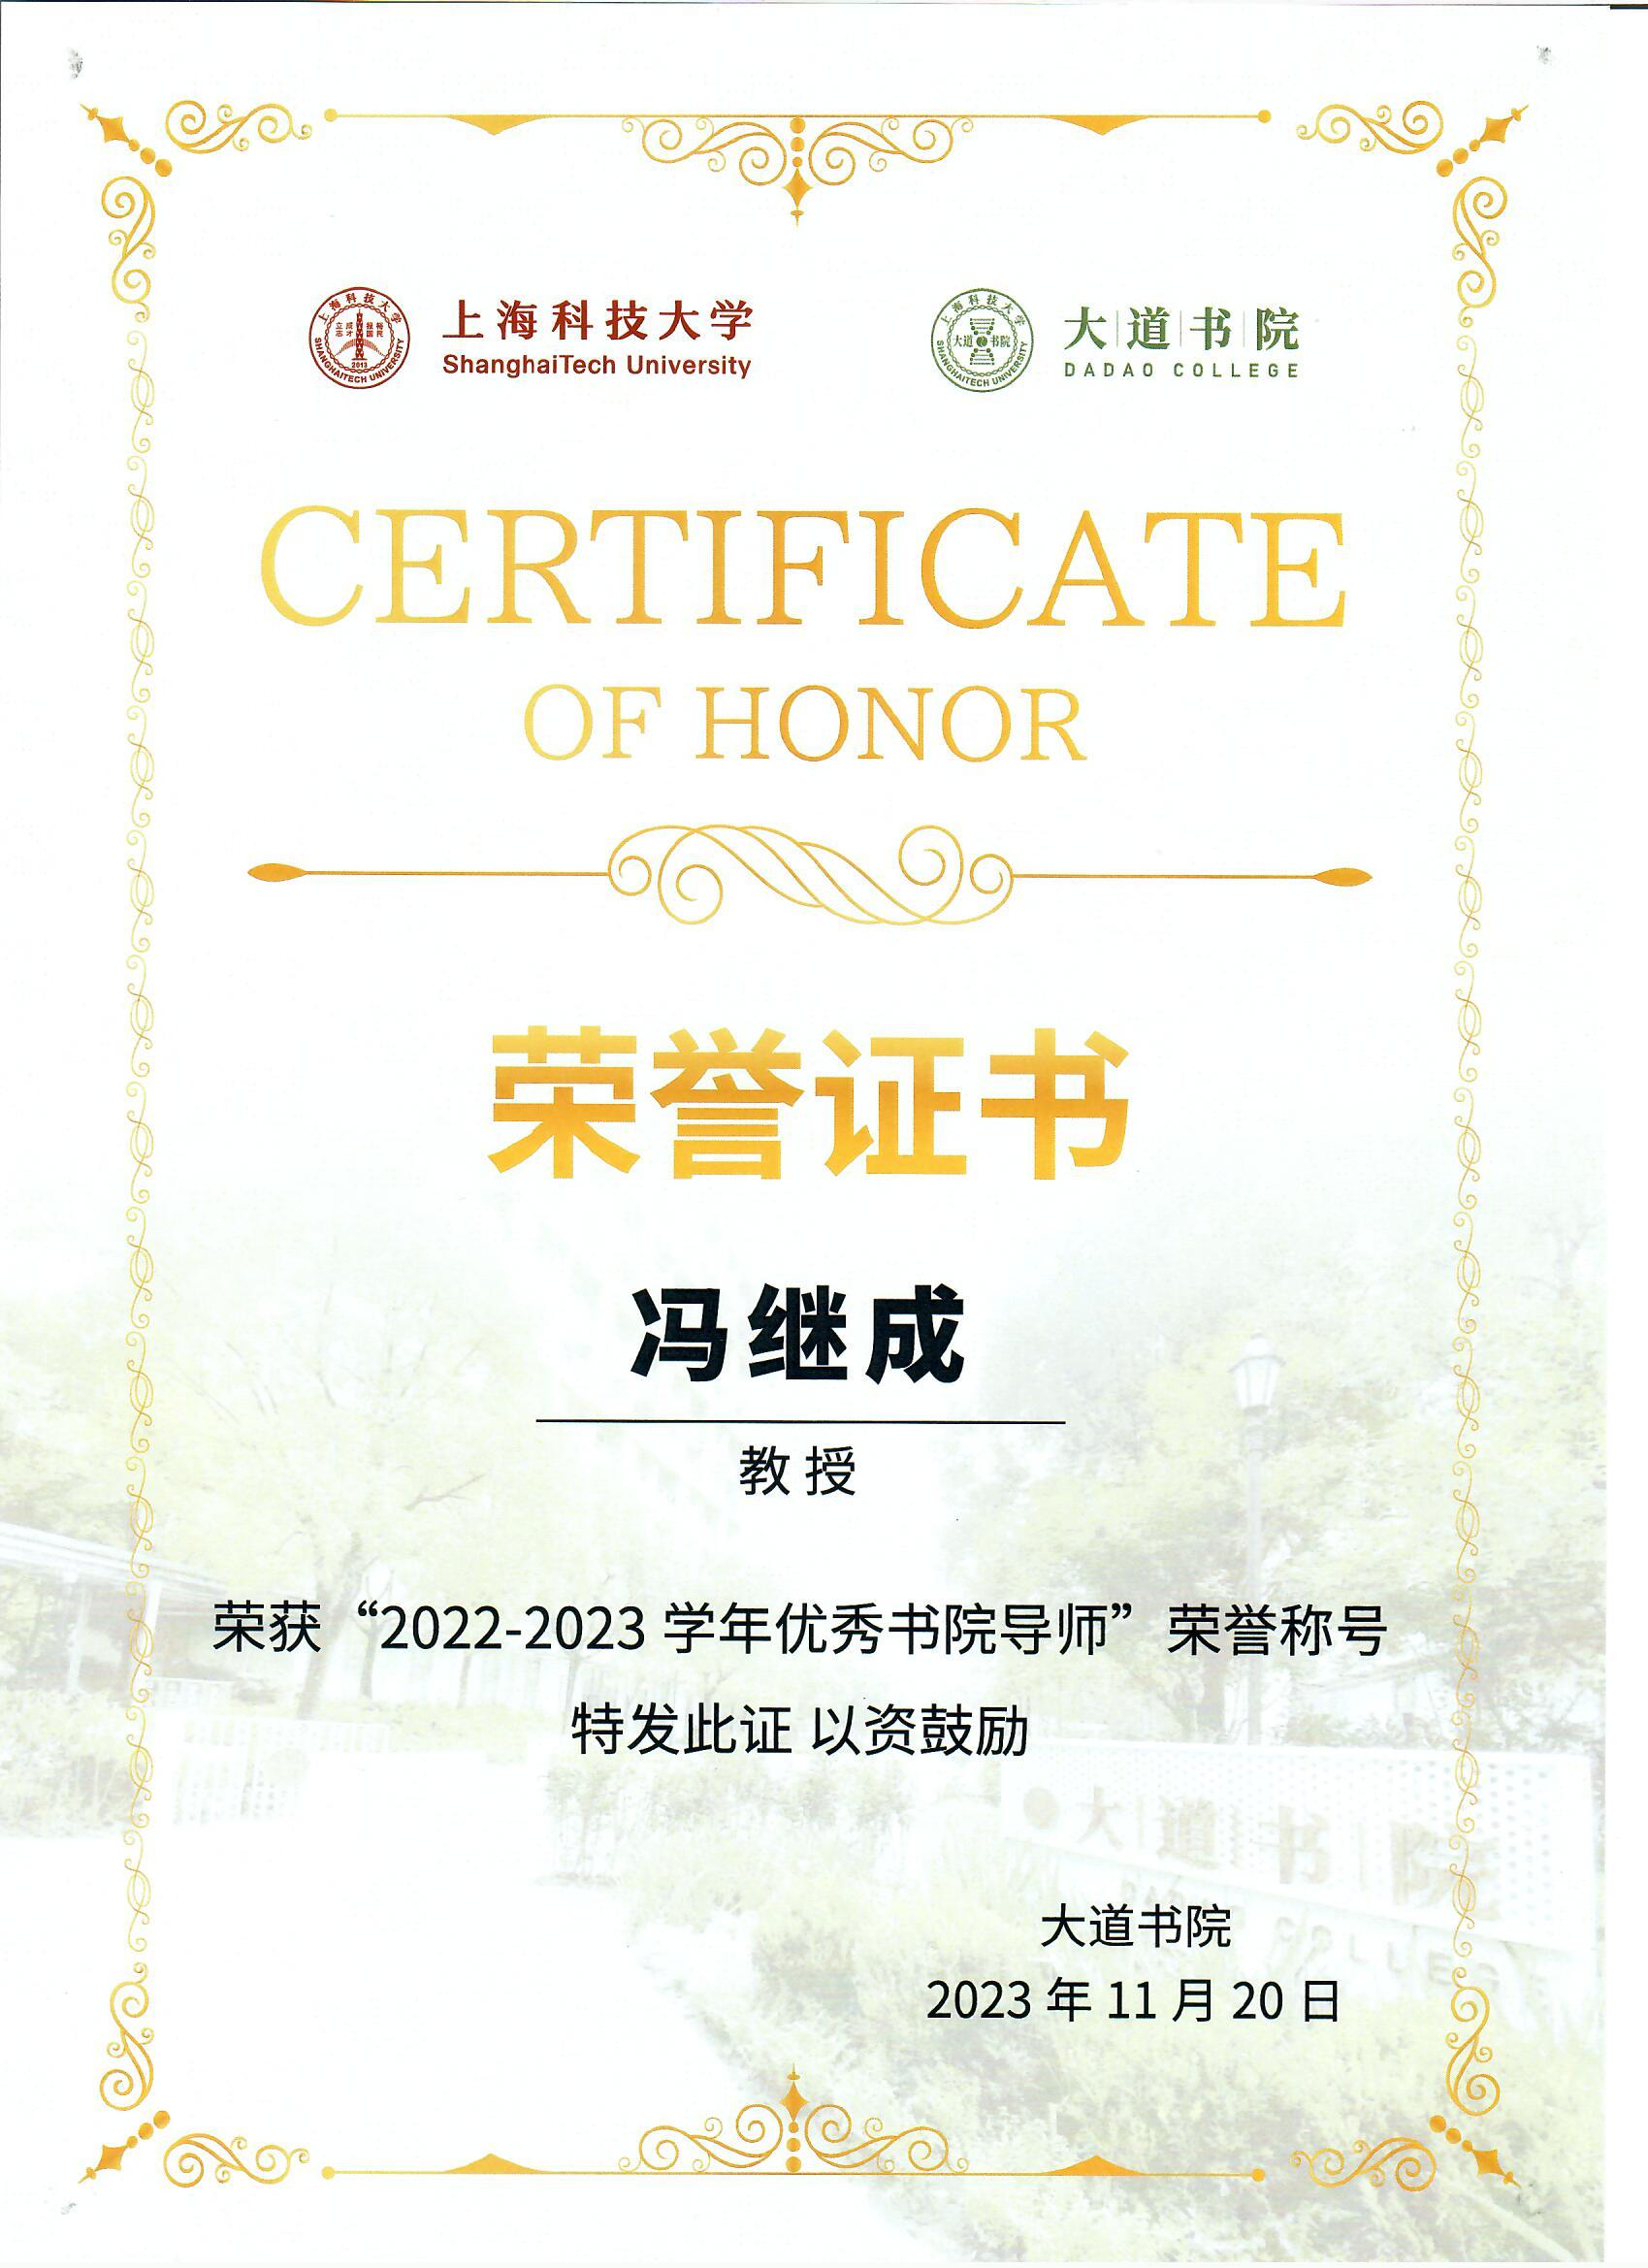 Nov. 2023, Jicheng received the Best Tutor Award  for crediting his contribution to promote the BSc students. 